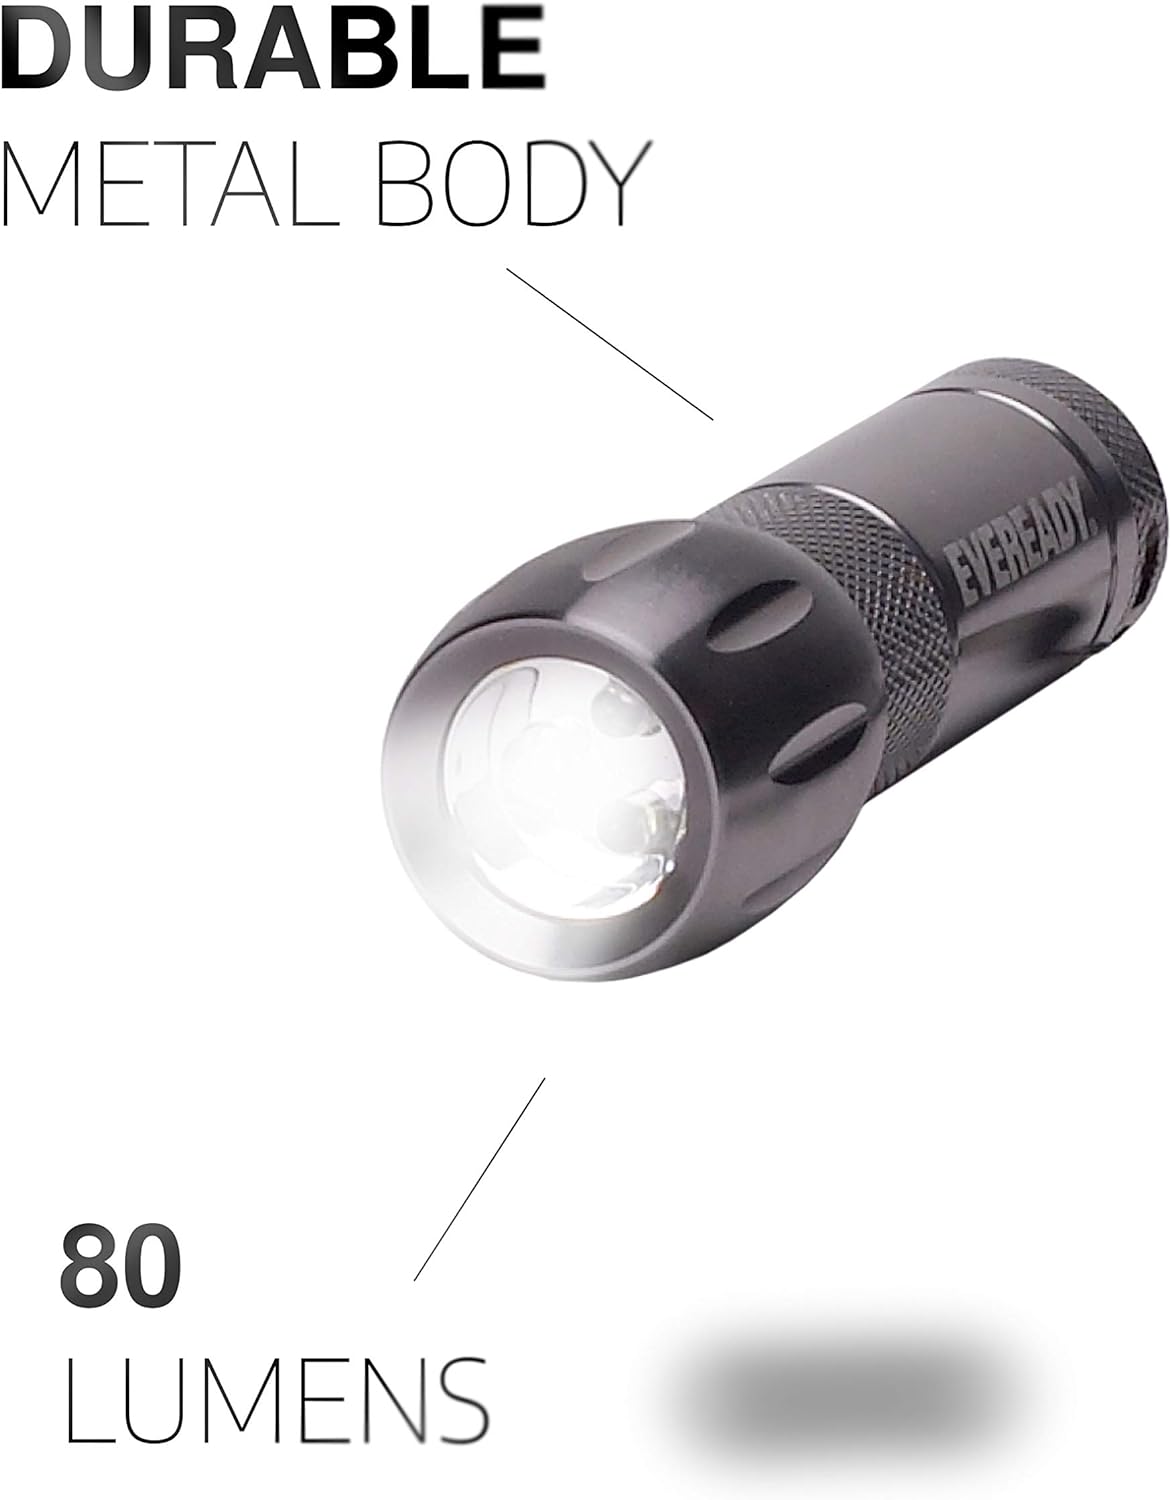 Eveready Compact LED Metal Flashlight​​​​ Water Resistant, Includes 3 Super Heavy Duty AAA Batteries, 21 Lumens , Black